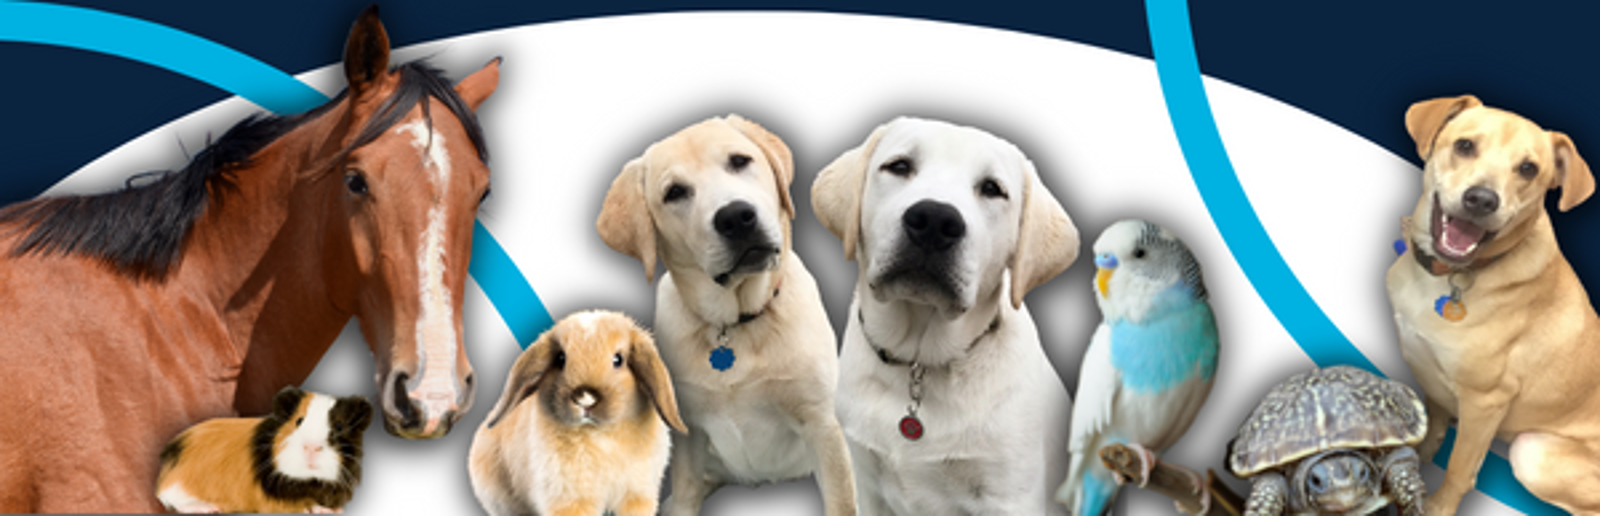 UNF: Animal-Assisted Interventions & Interactions Certificate Program